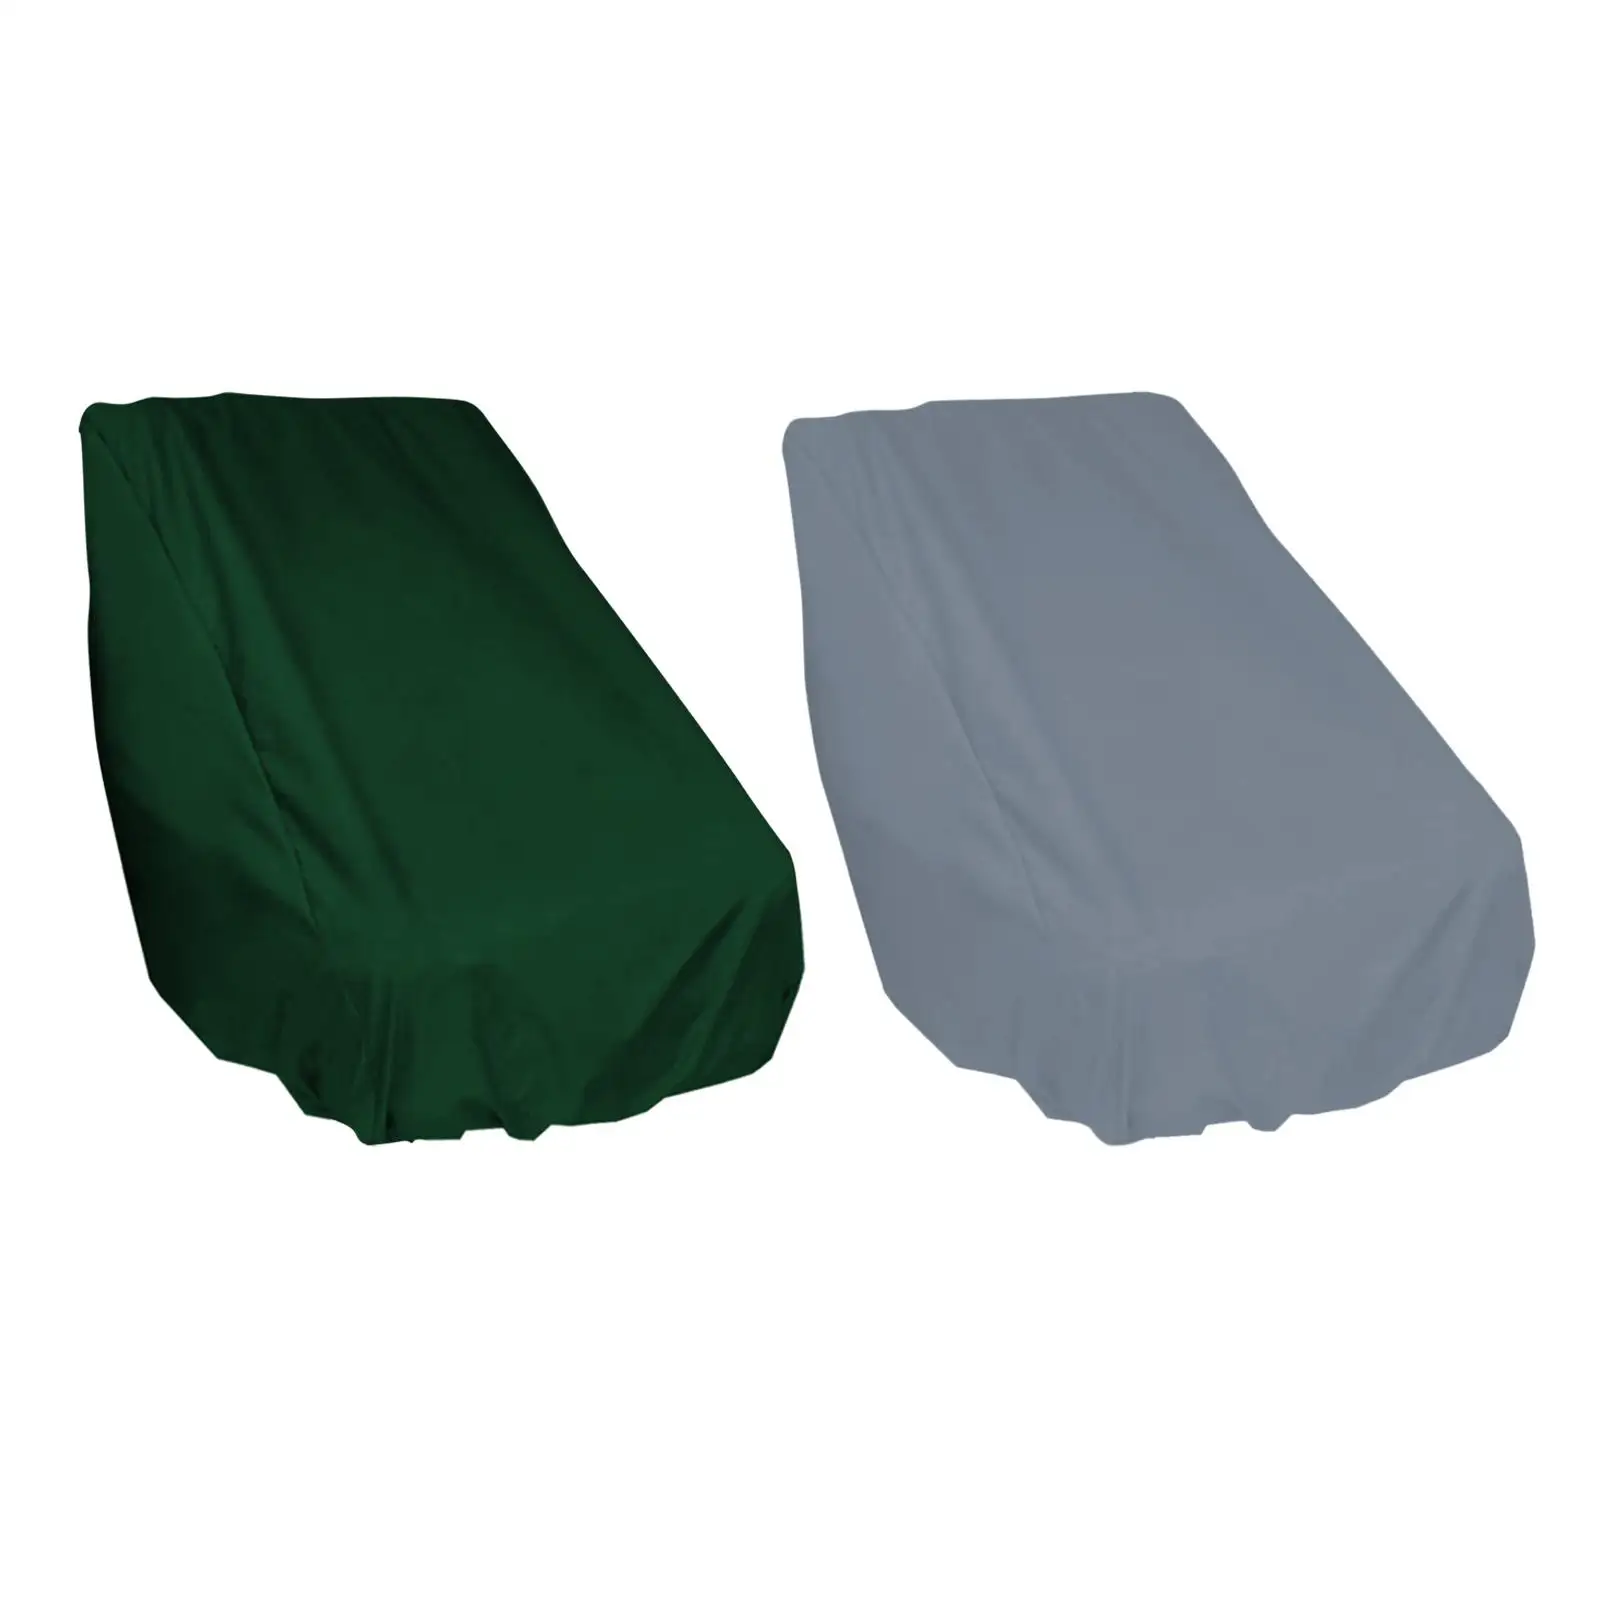 Boat Seat Cover UV Resistant Boat Chair Seat Cover Durable Captain`s Chair Cover Waterproof Outdoor Helm Chair Protective Covers